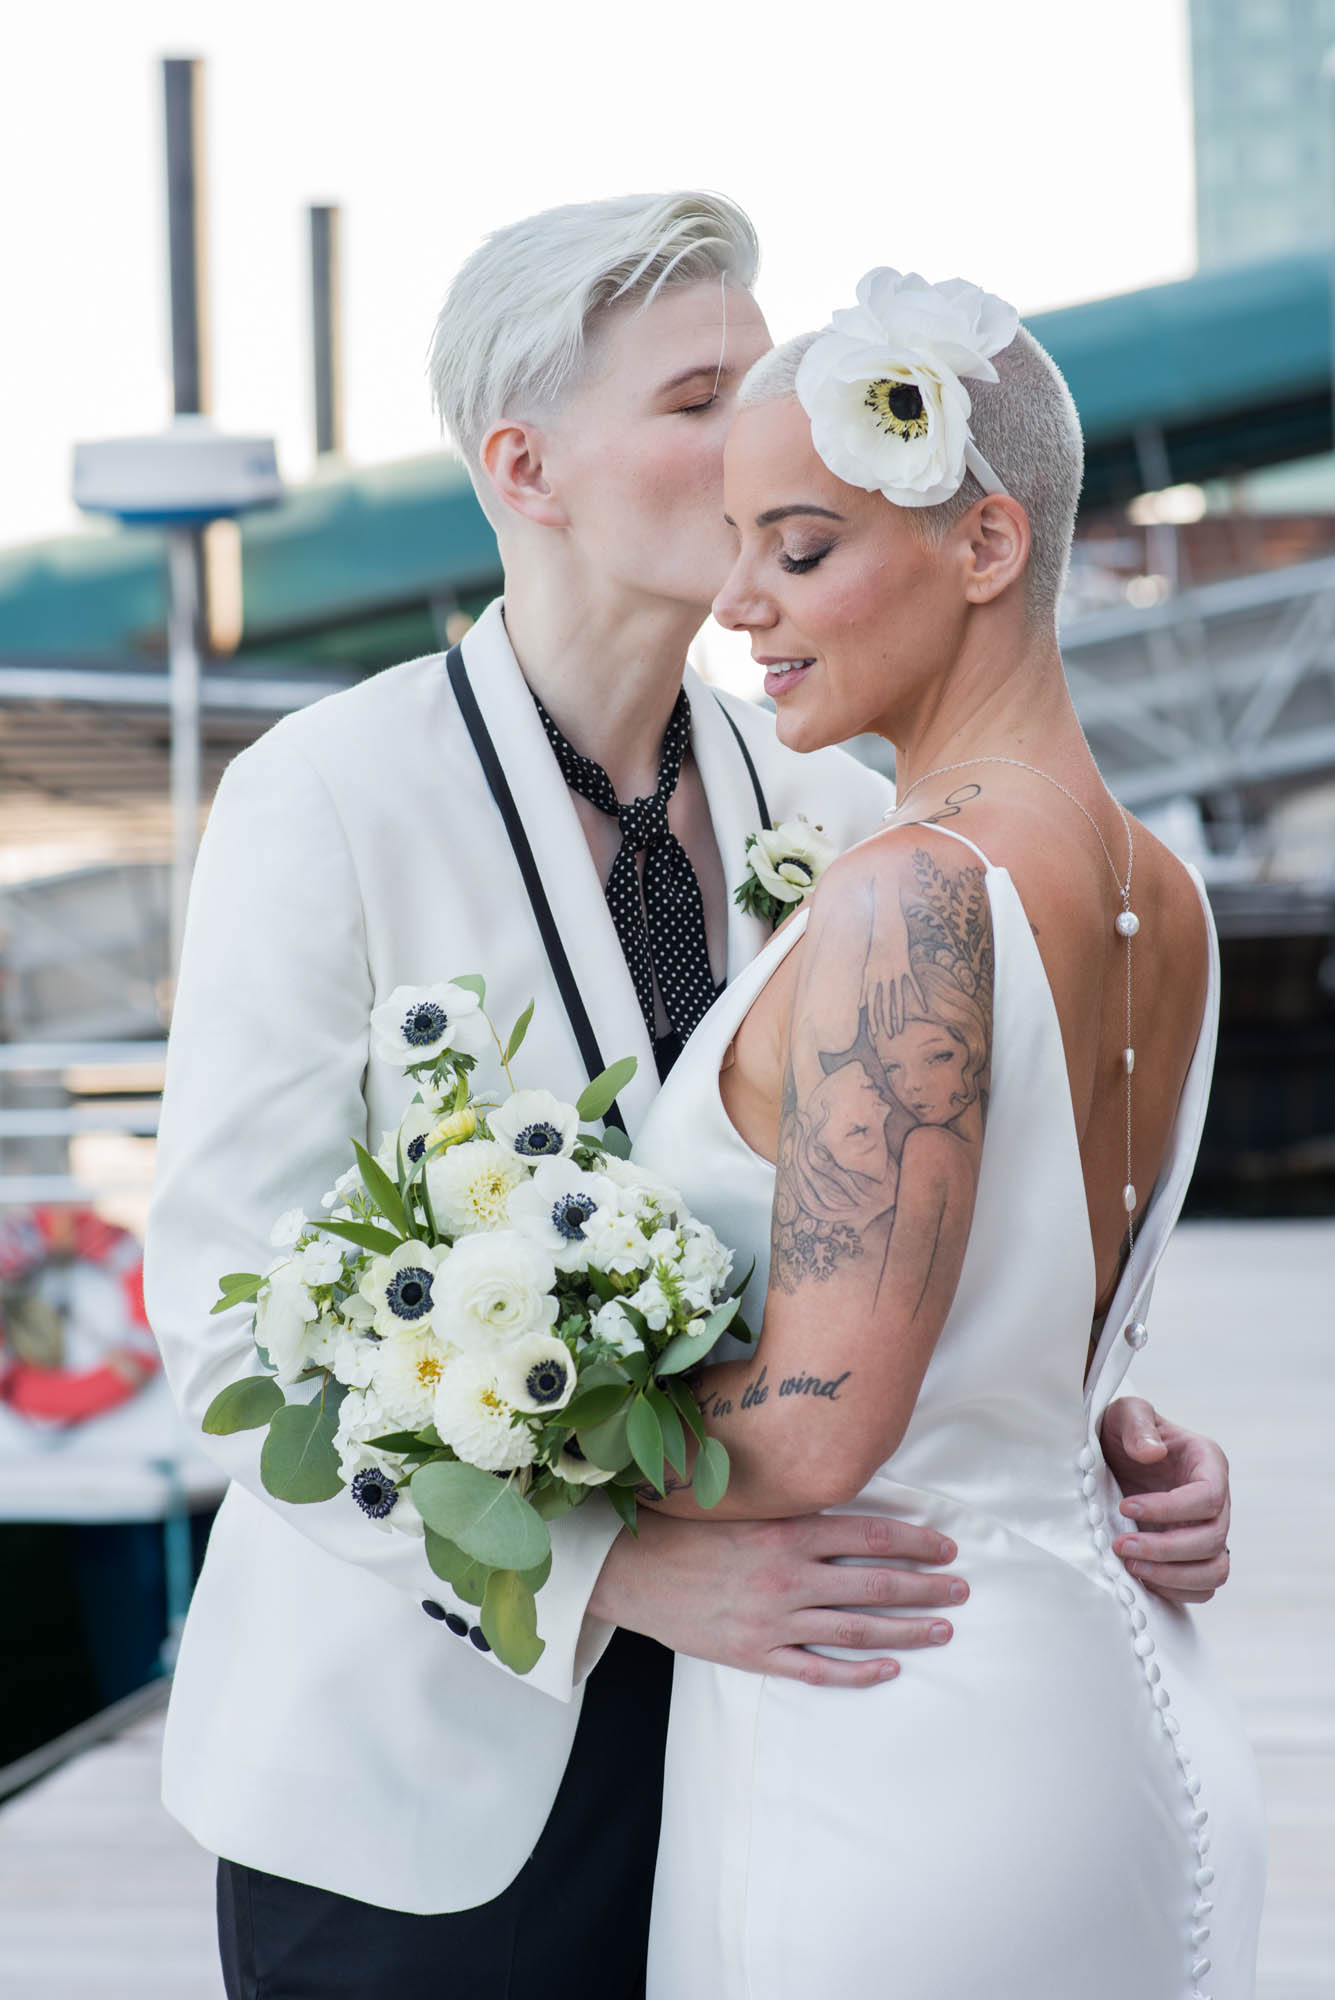 An intimate, nonbinary pandemic wedding at sea | Sister City Photography | Featured on Equally Wed, the leading LGBTQ+ wedding magazine 